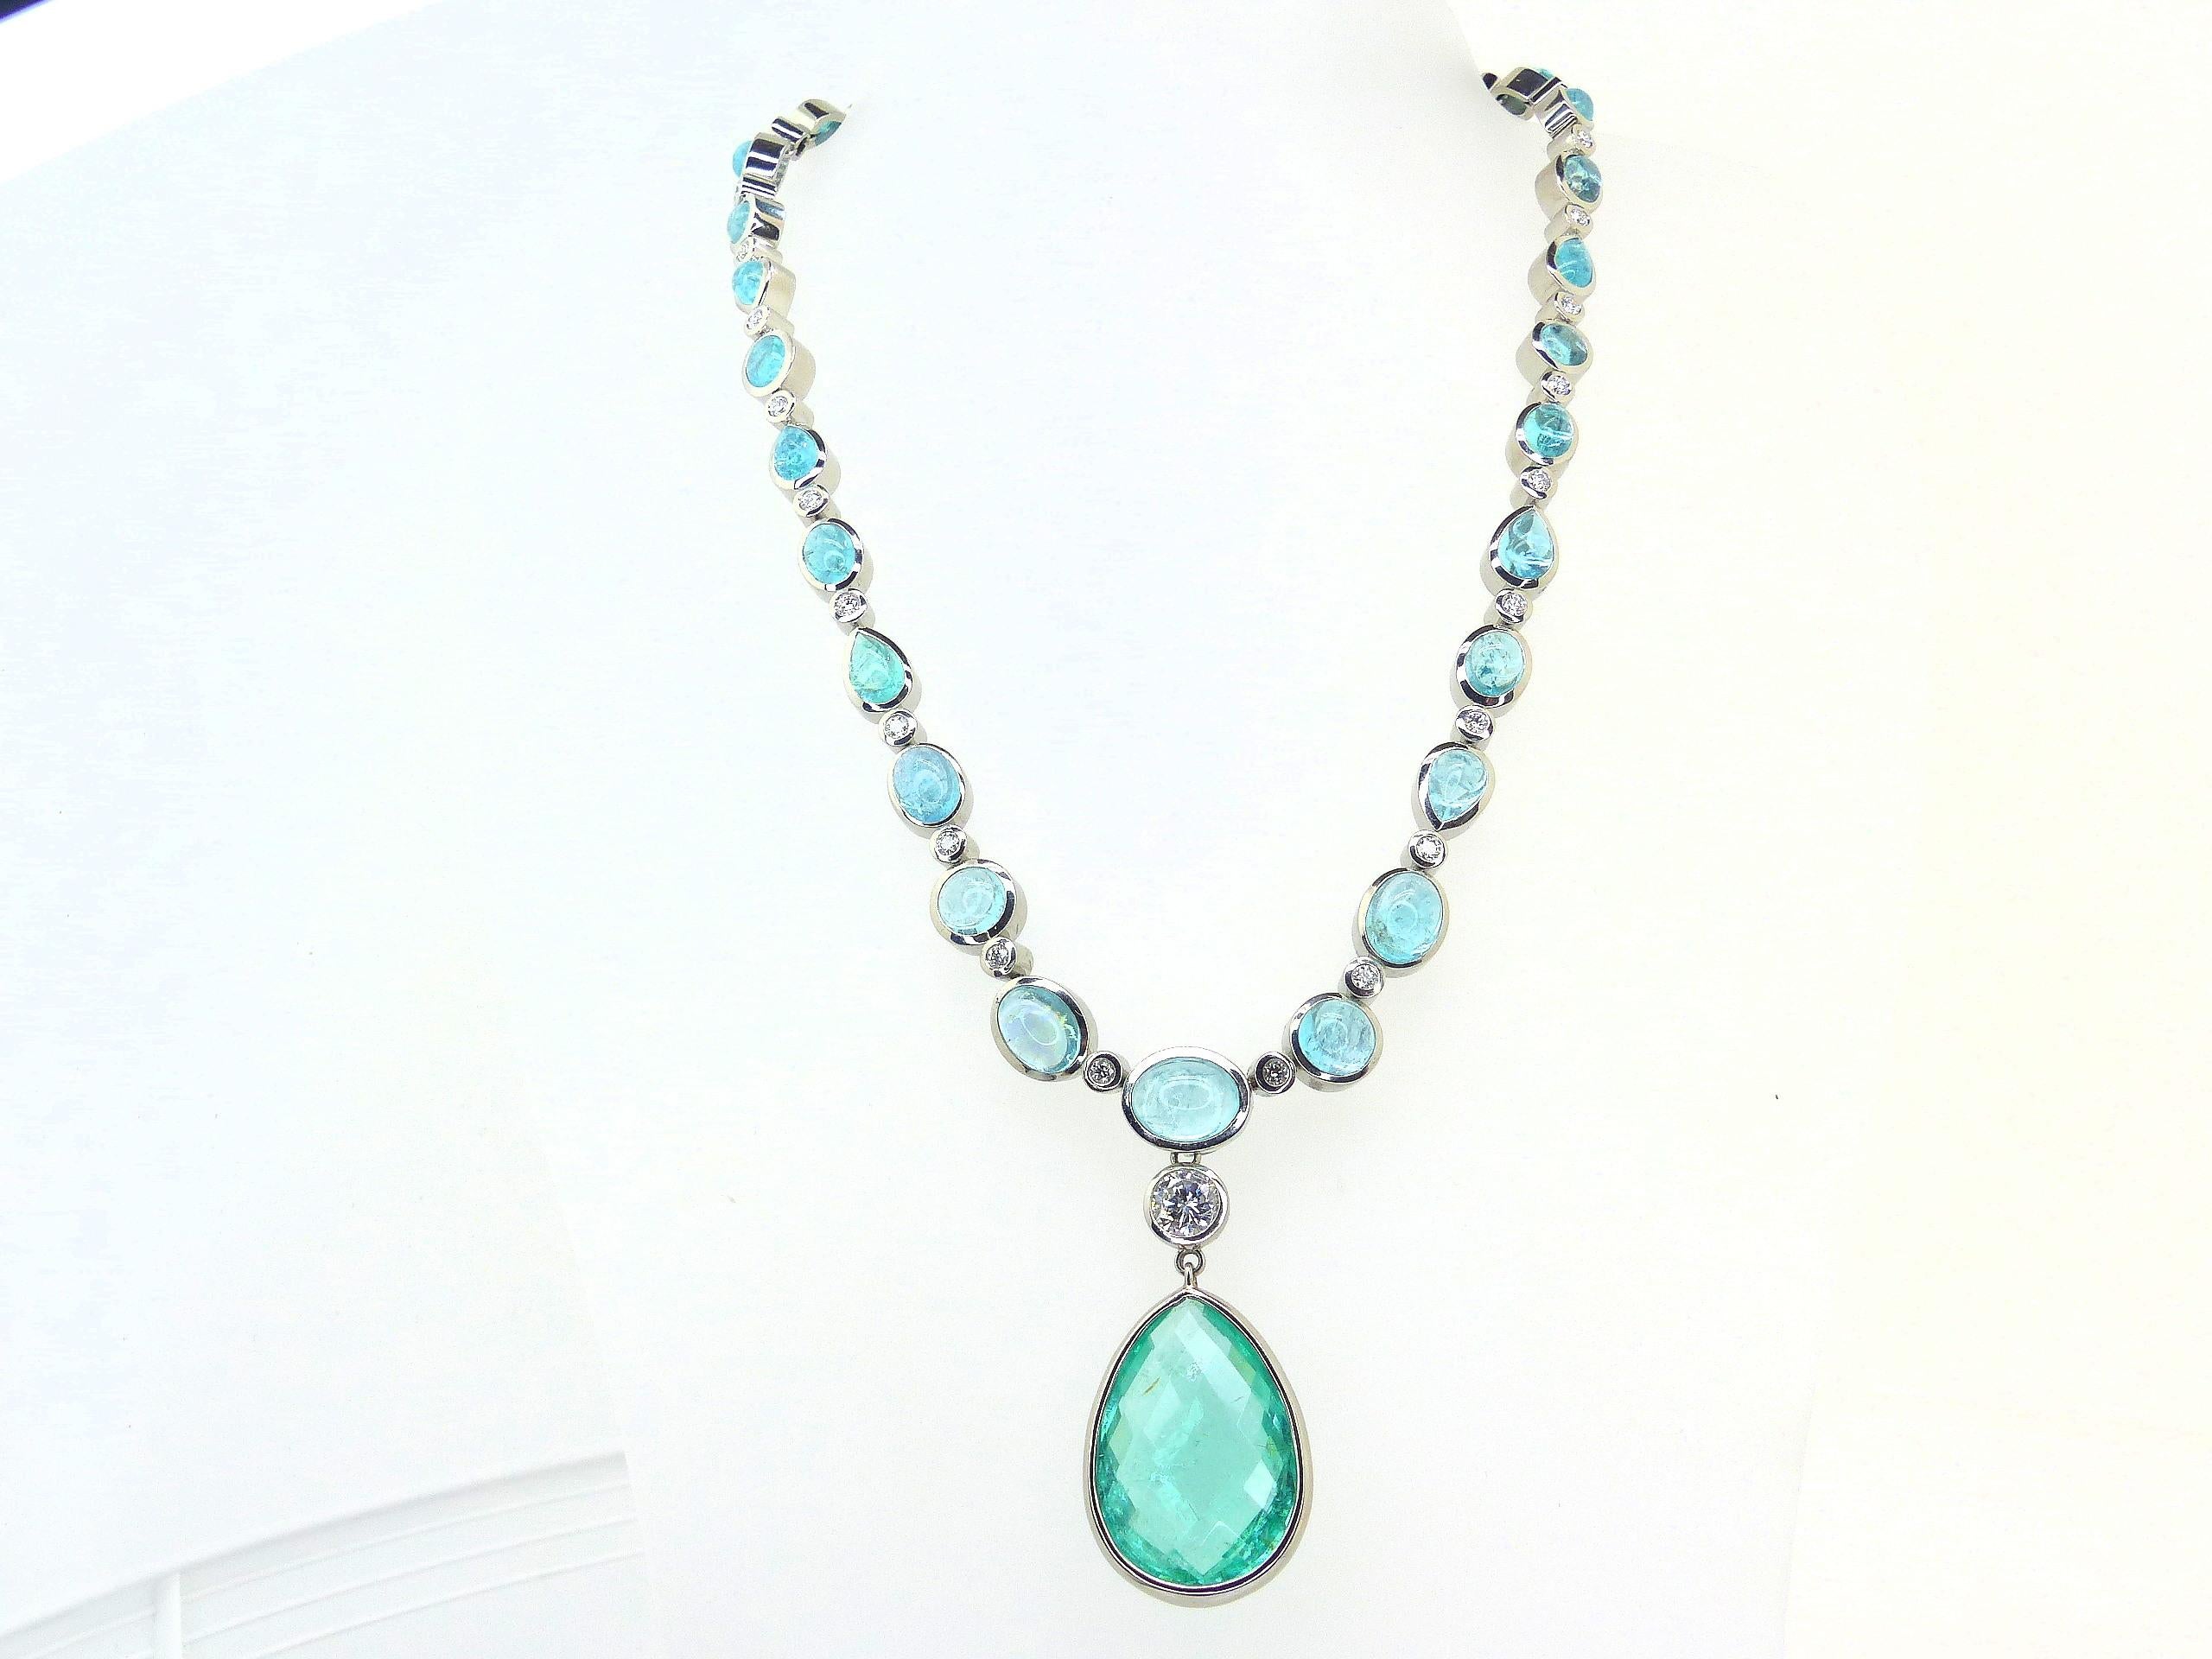 Necklace in Platinum with 29 Paraiba Tourmaline Cabouchons and 46 Diamonds 1